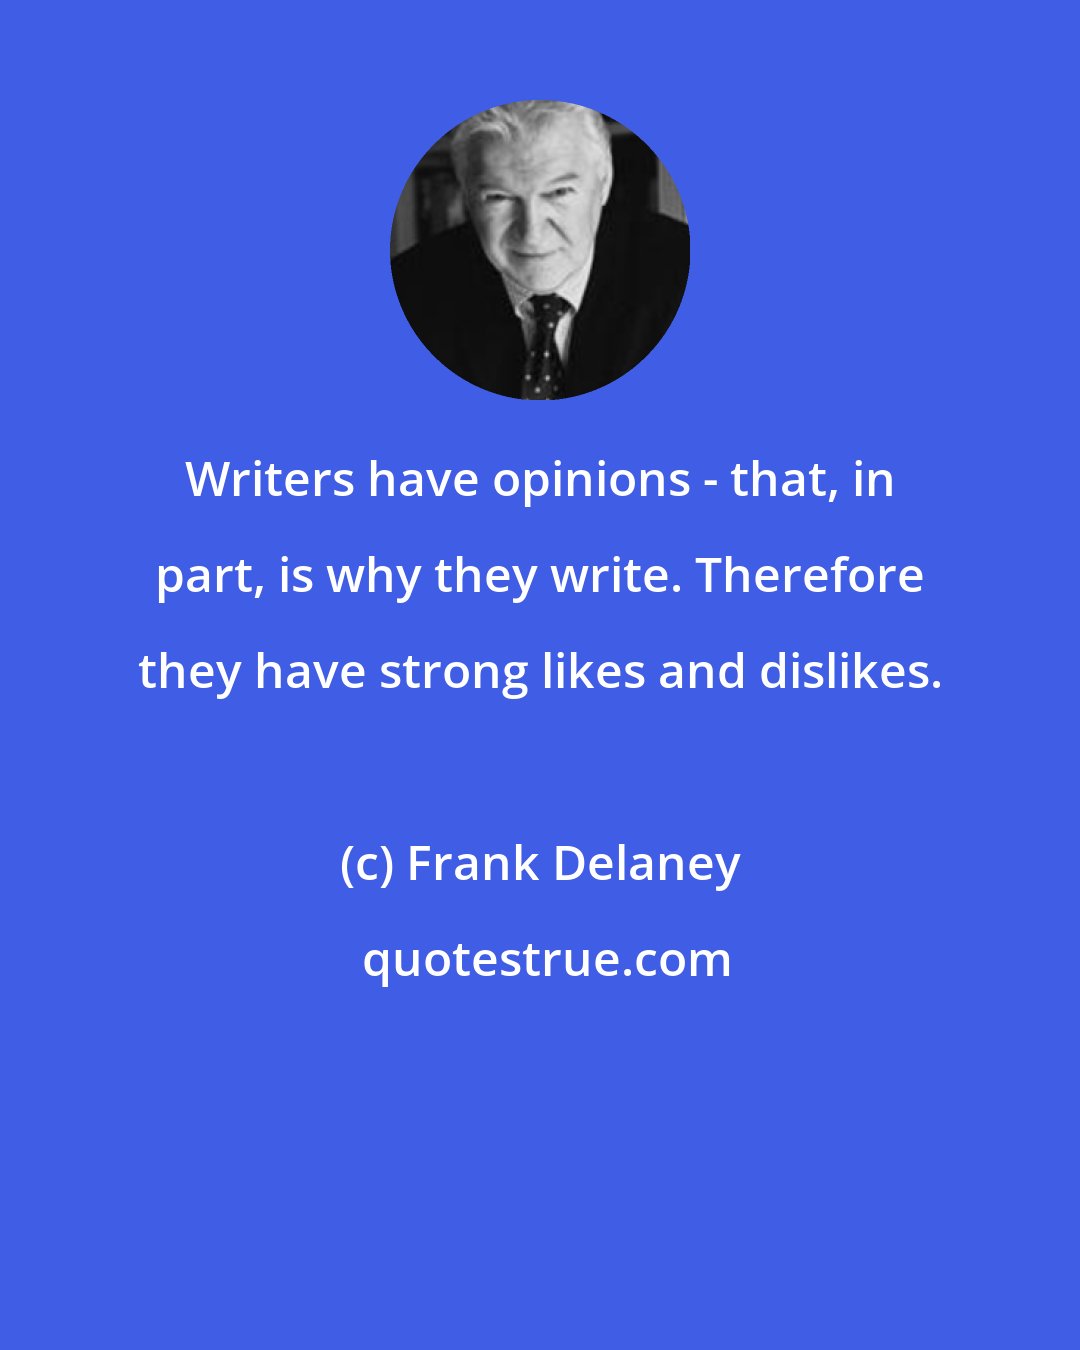 Frank Delaney: Writers have opinions - that, in part, is why they write. Therefore they have strong likes and dislikes.